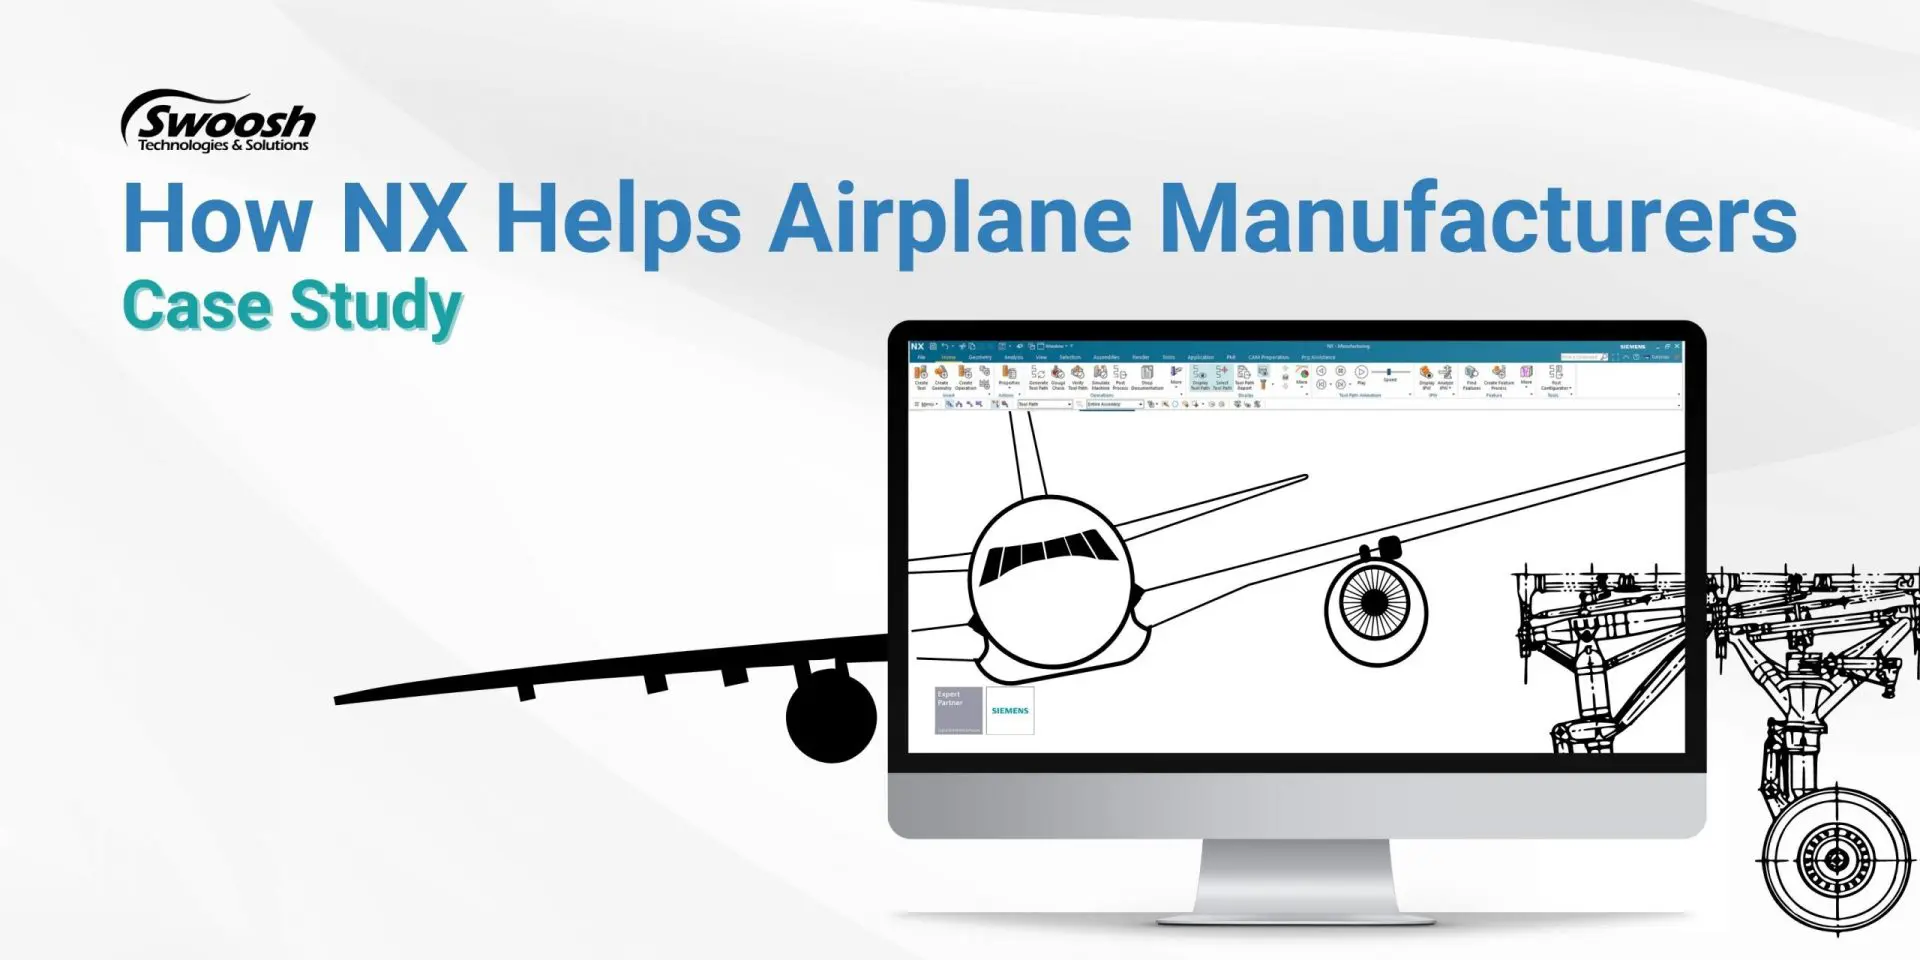 Case Study: How NX Helps Airplane Manufacturers